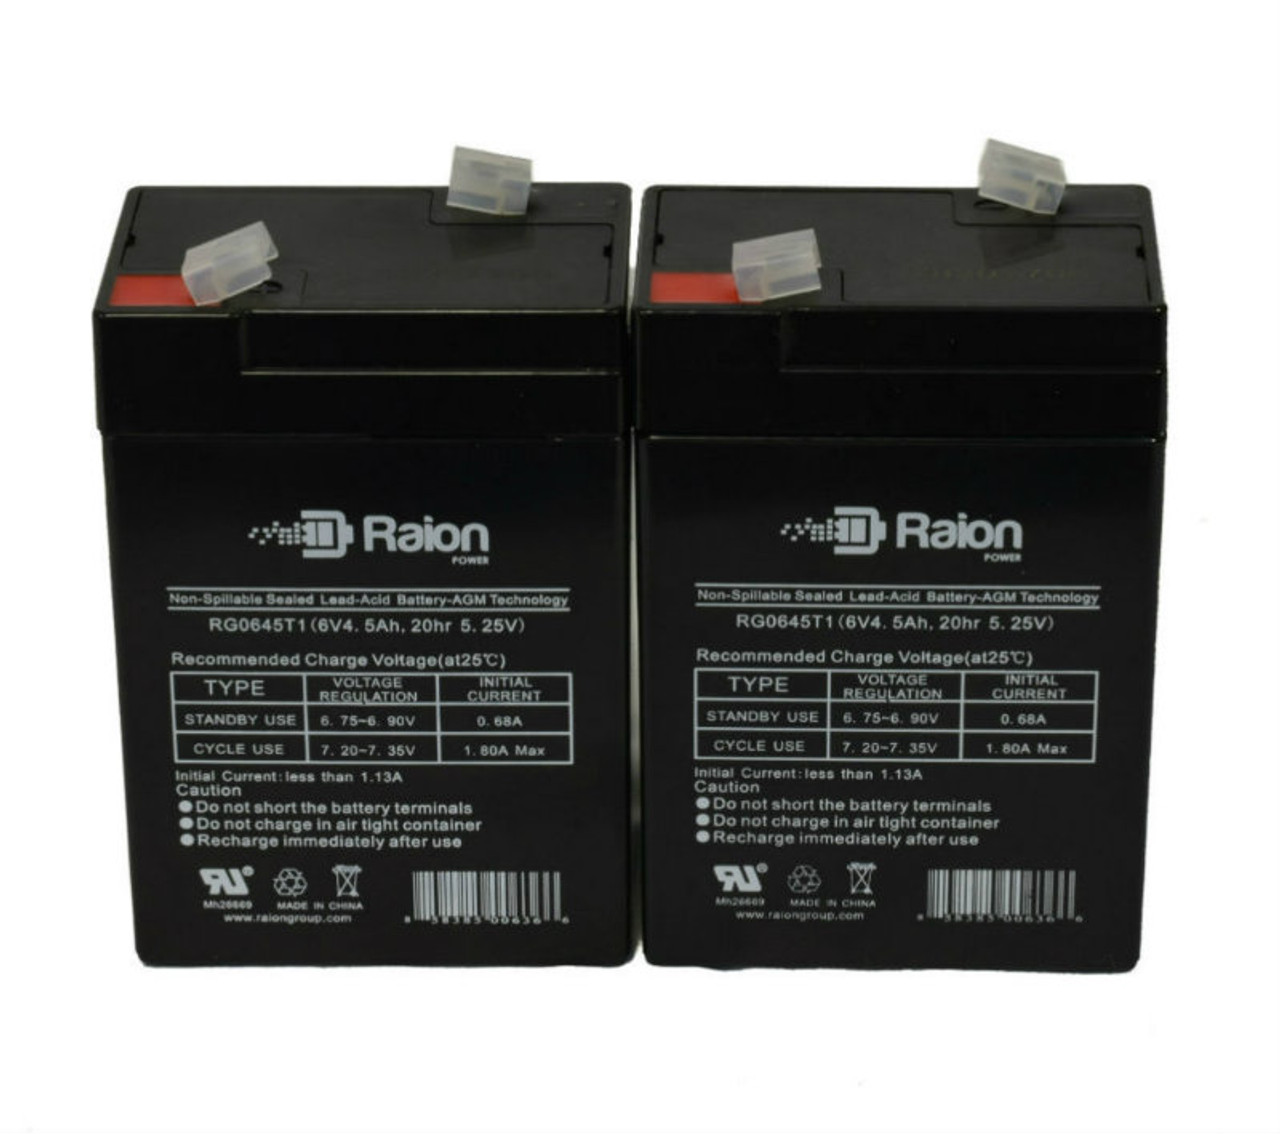 Raion Power 6V 4.5Ah Replacement Emergency Light Battery for Mule 6GC0121 - 2 Pack